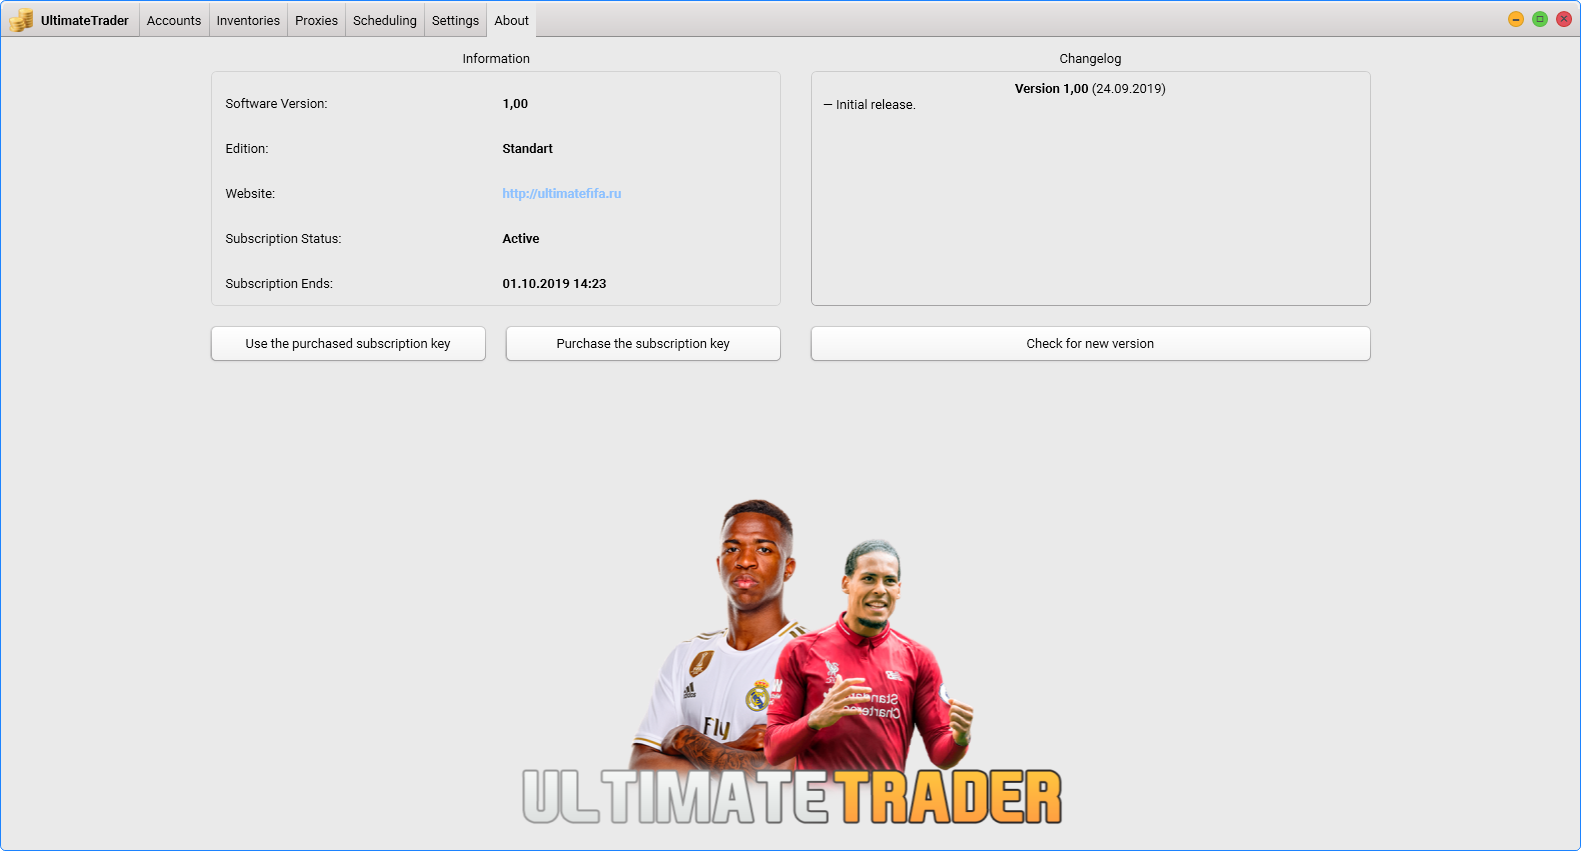 UltimateTrader - autobayer for FIFA 20 (7 days)